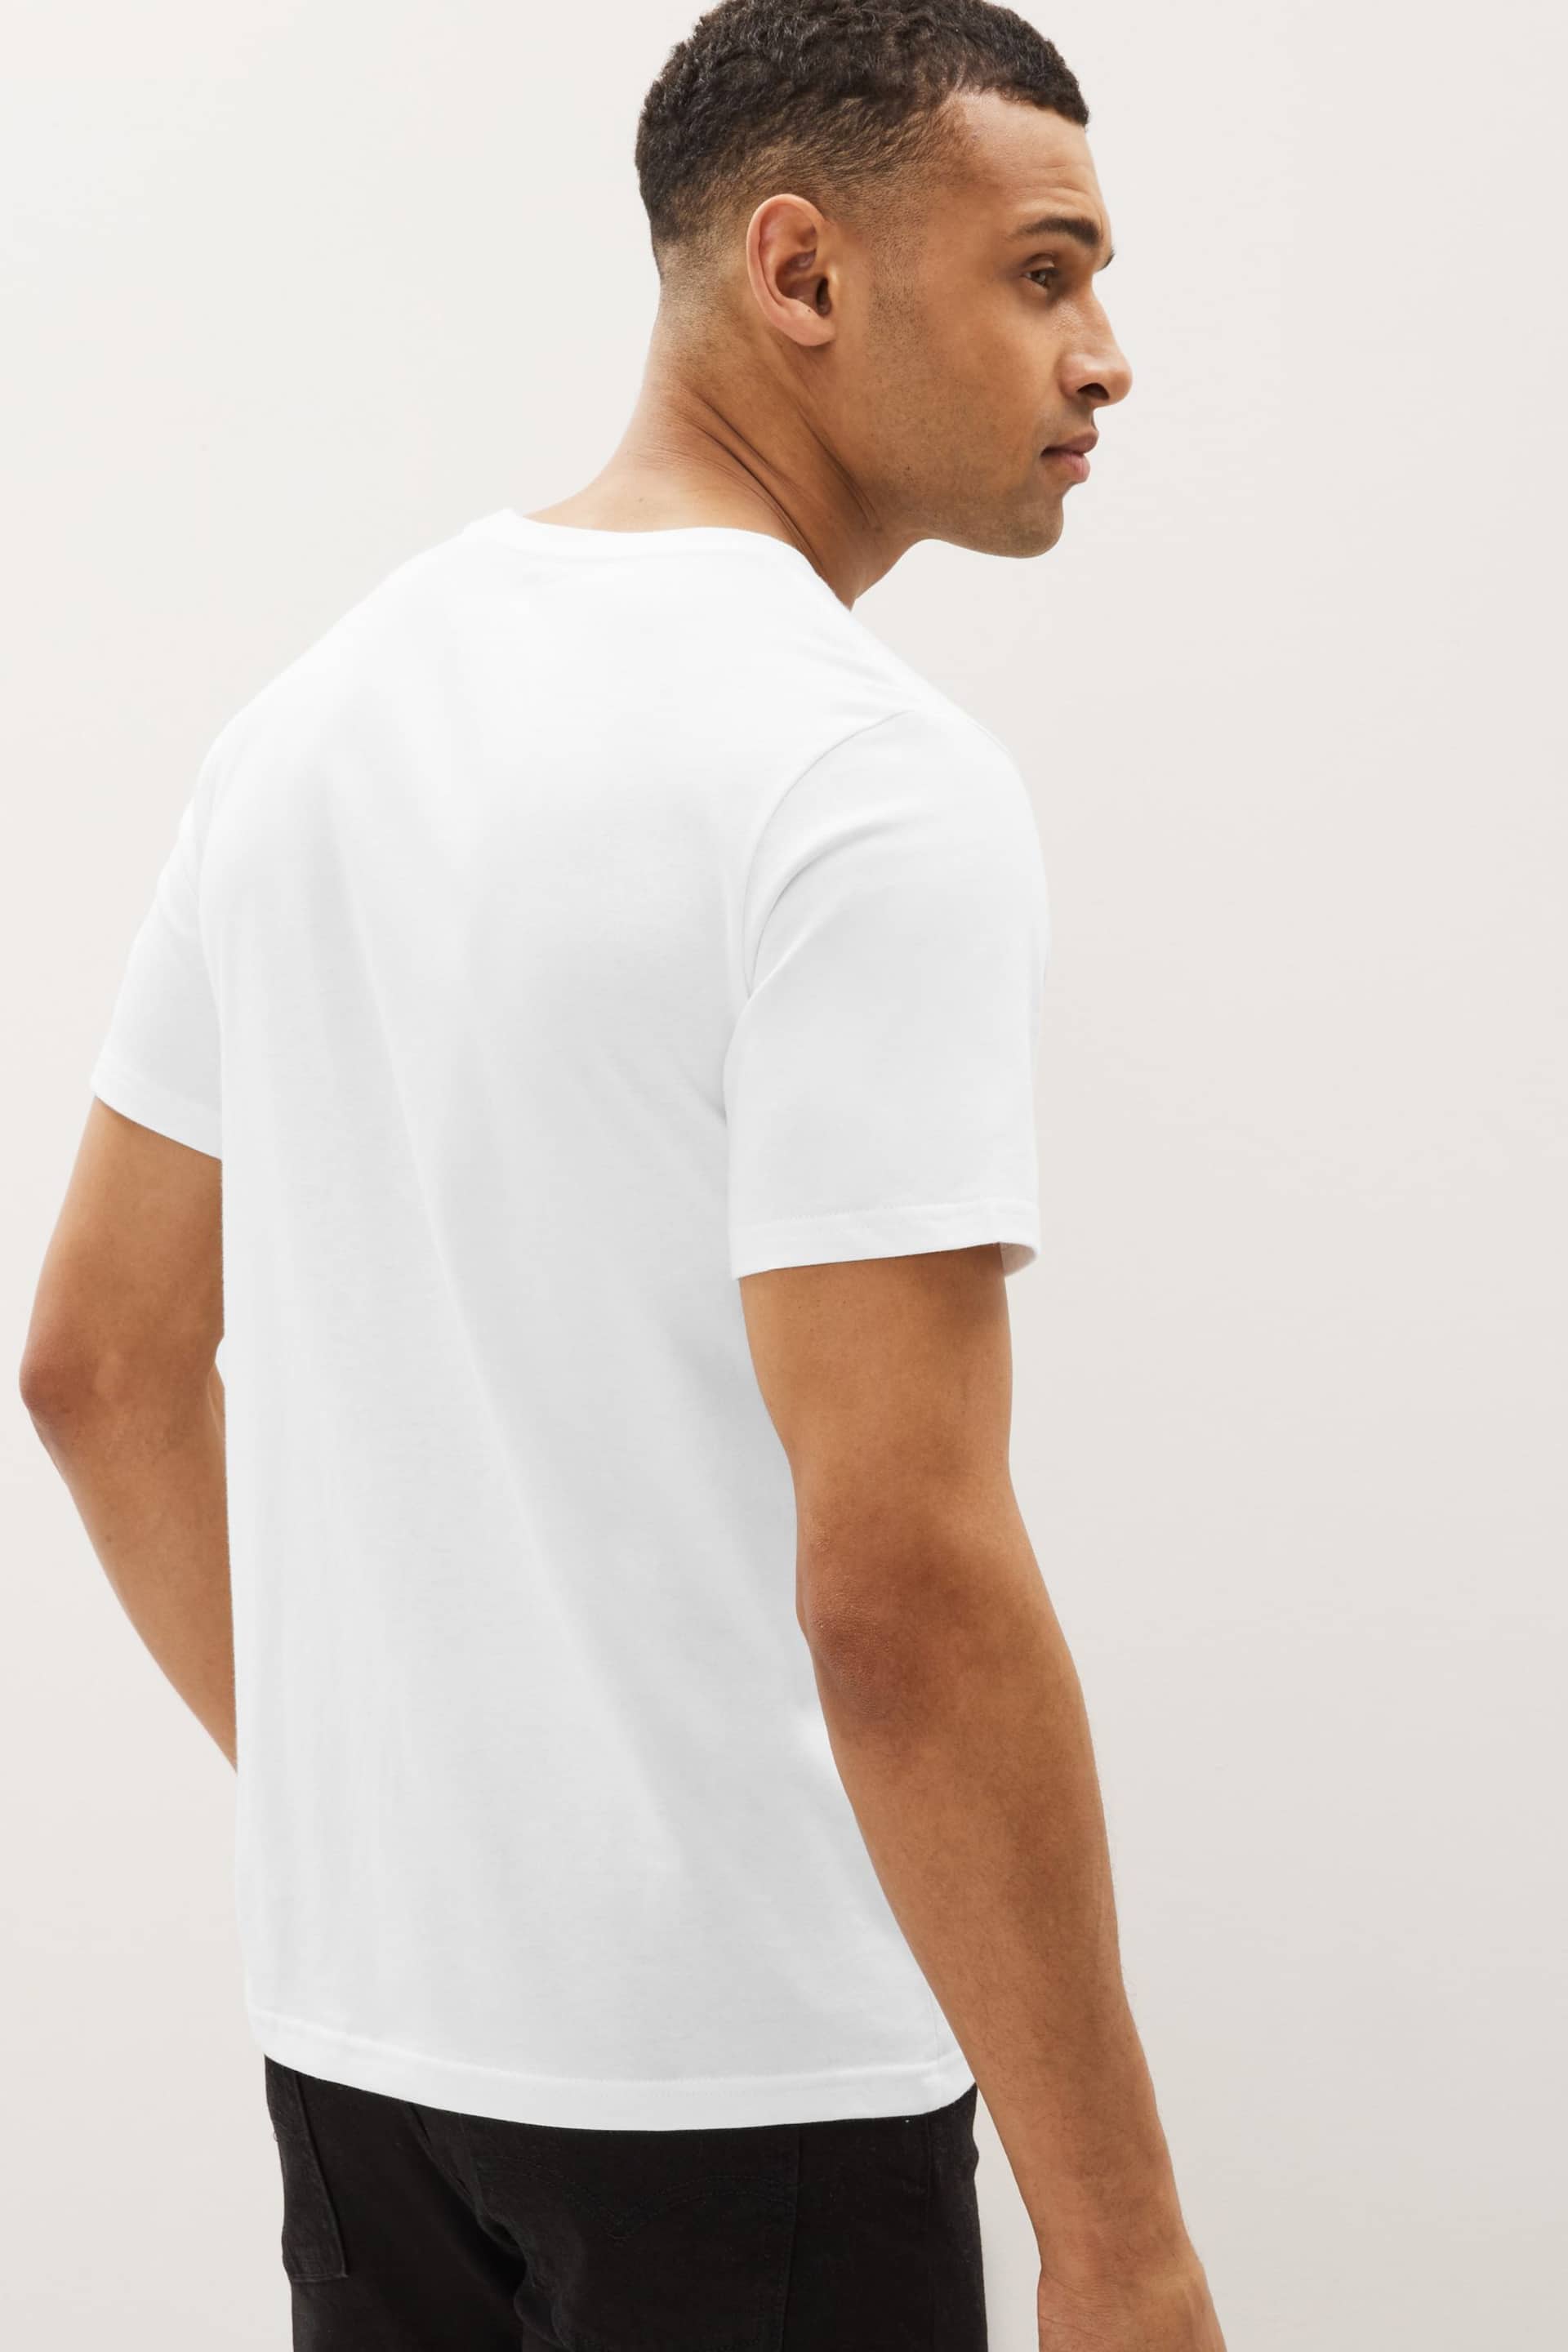 Converse White Classic T-Shirt - Image 2 of 4